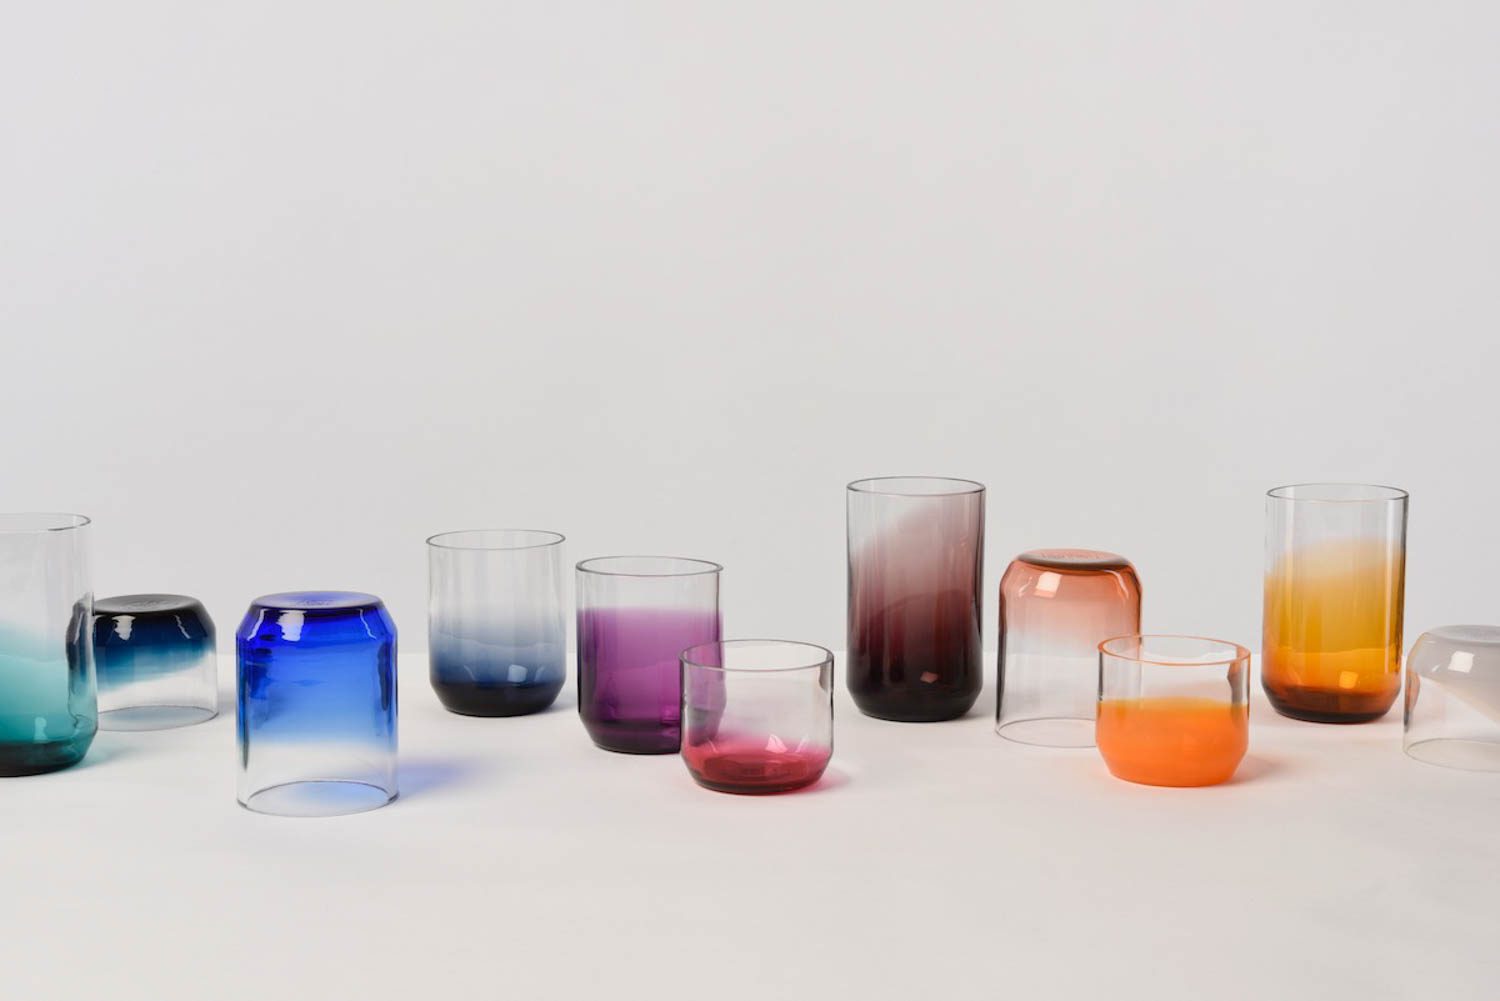 Exploration with metal oxides drew out the unique color fade in Elements of Colour, a collection of gradient glassware by Michelle Müller with glassmakers Maestro Peter Kuchinke and Torsten Rötzsch.